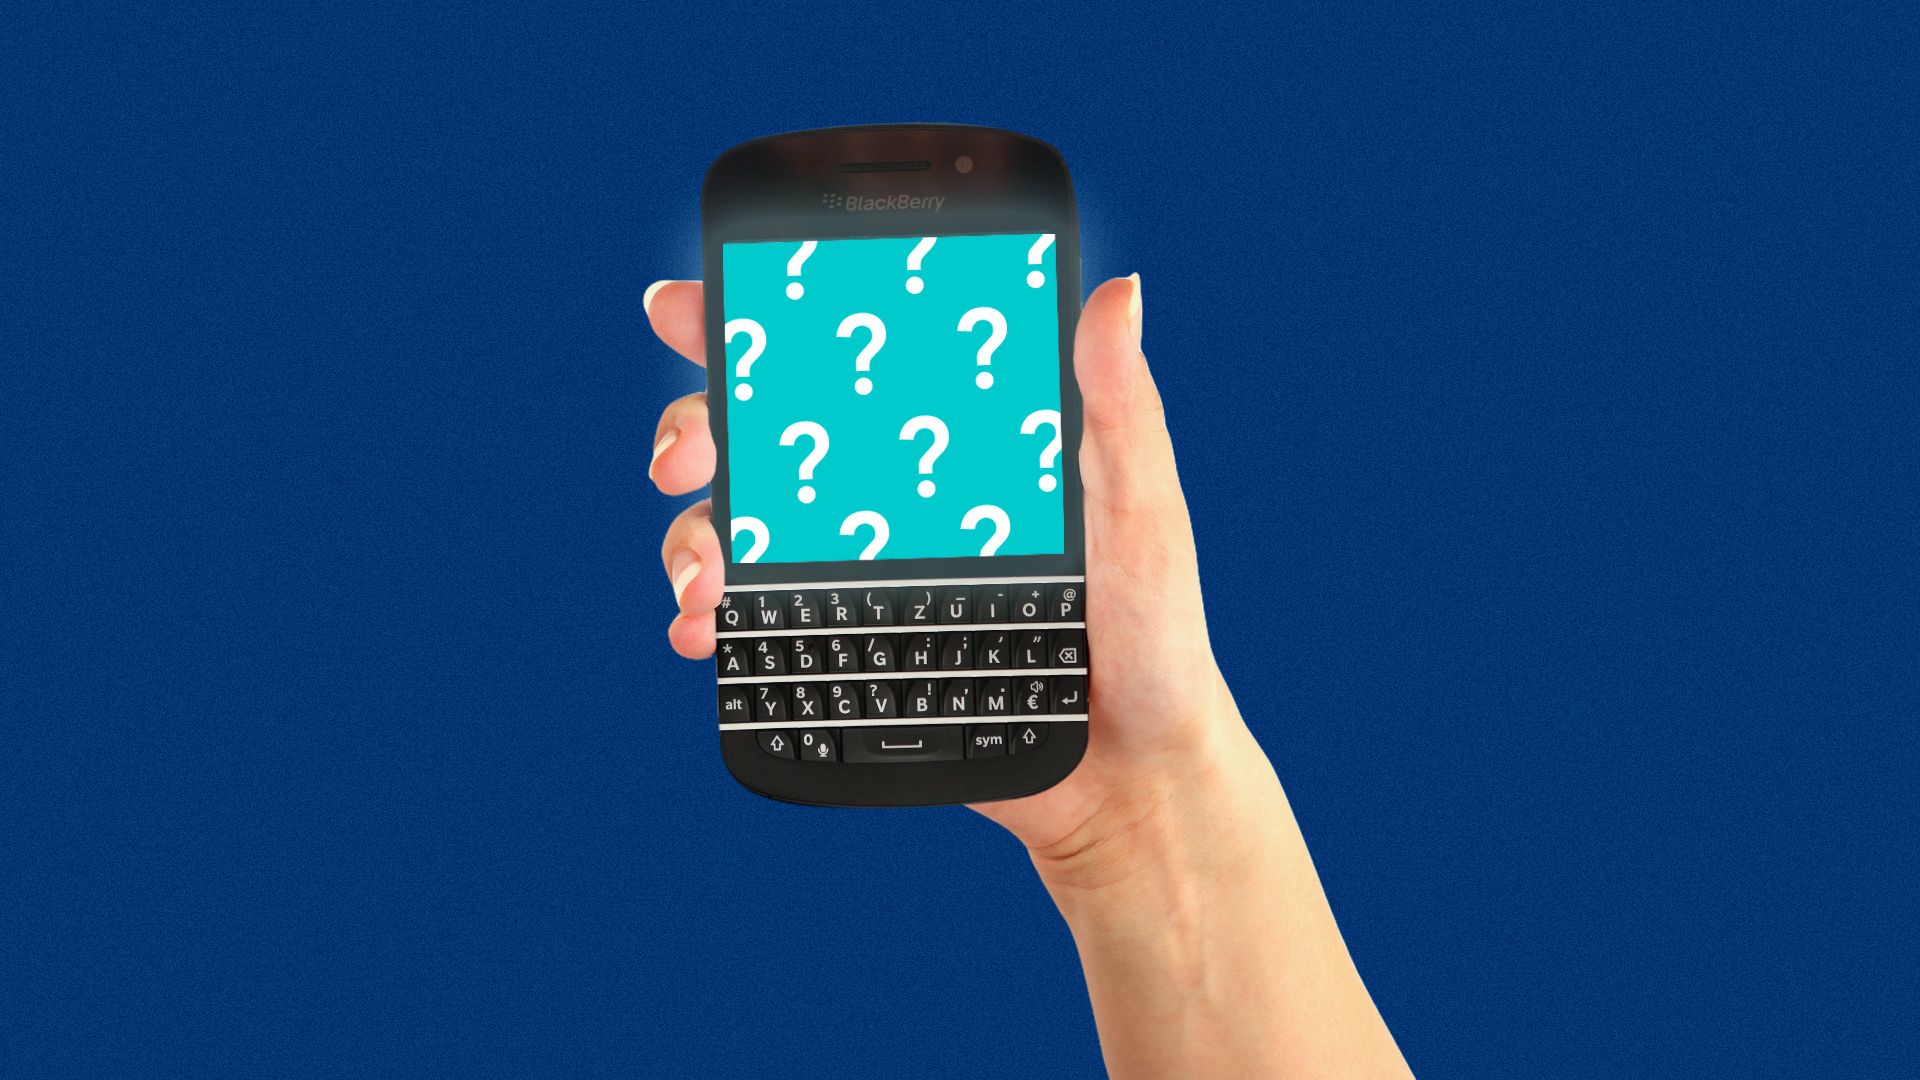 Illustration of a hand holding a BlackBerry phone with question marks on the screen.   